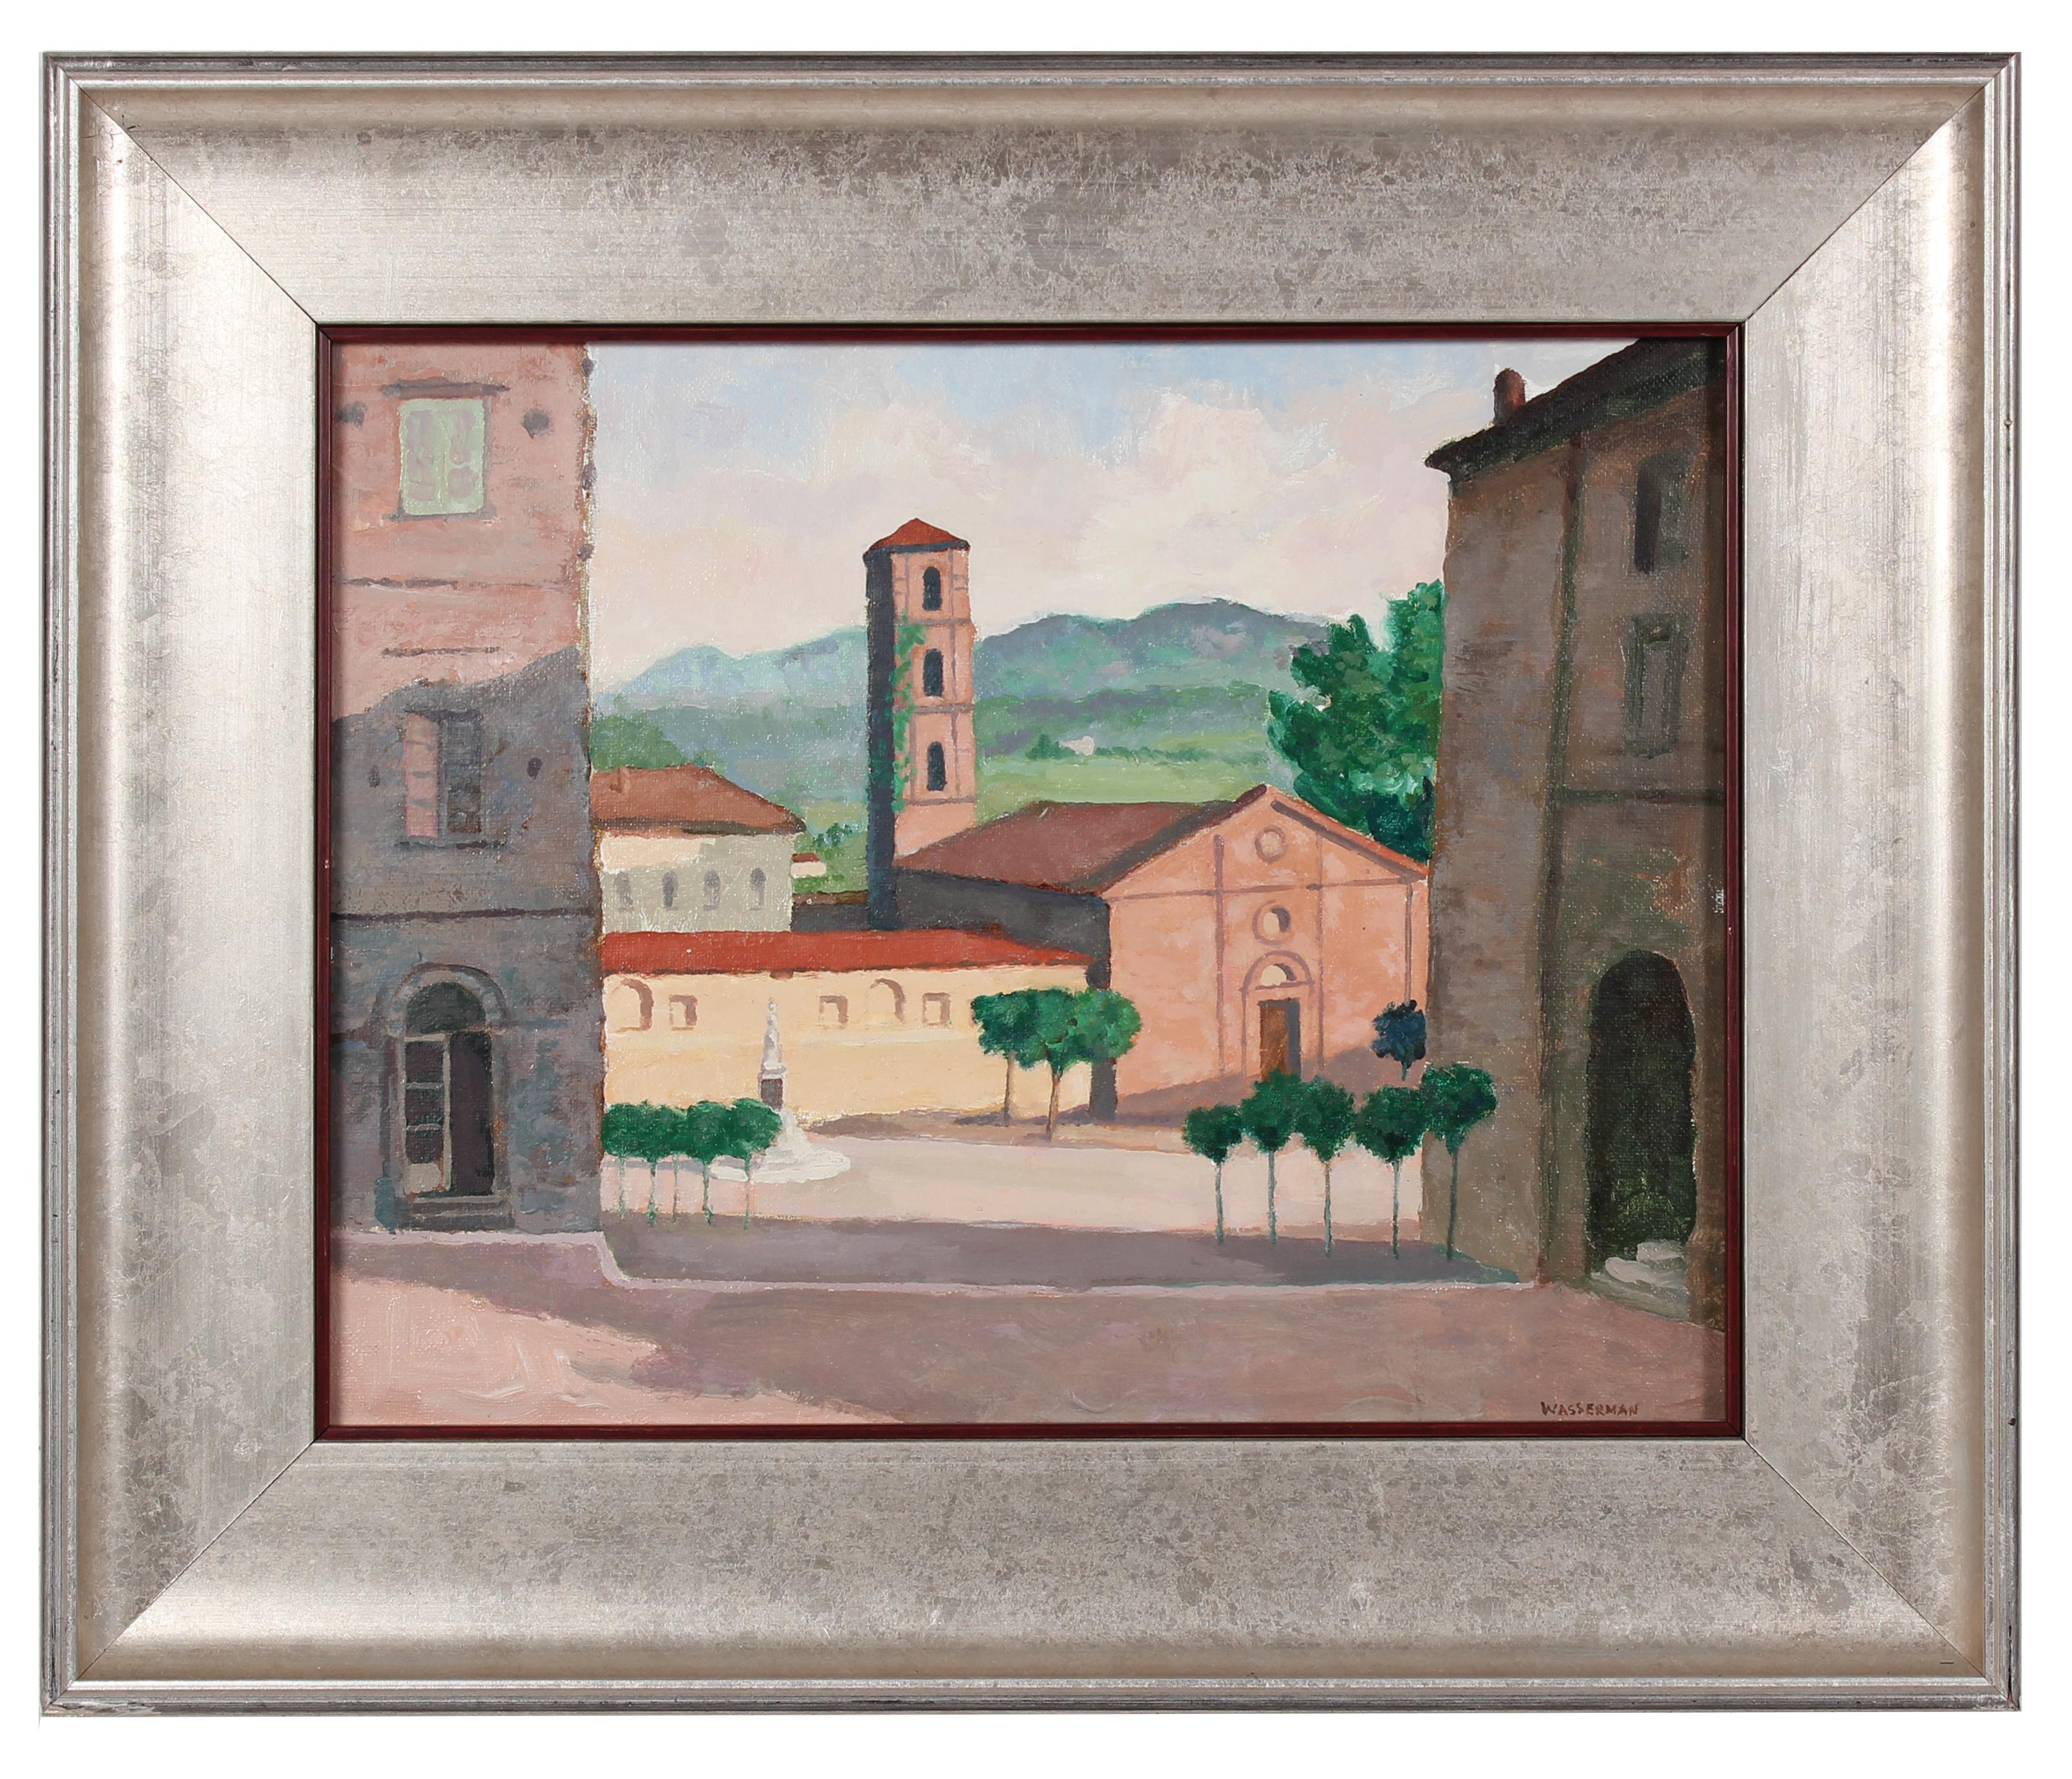 Gerald Wasserman Landscape Painting - "Sarteano, Italy" Cityscape Painting in Oil